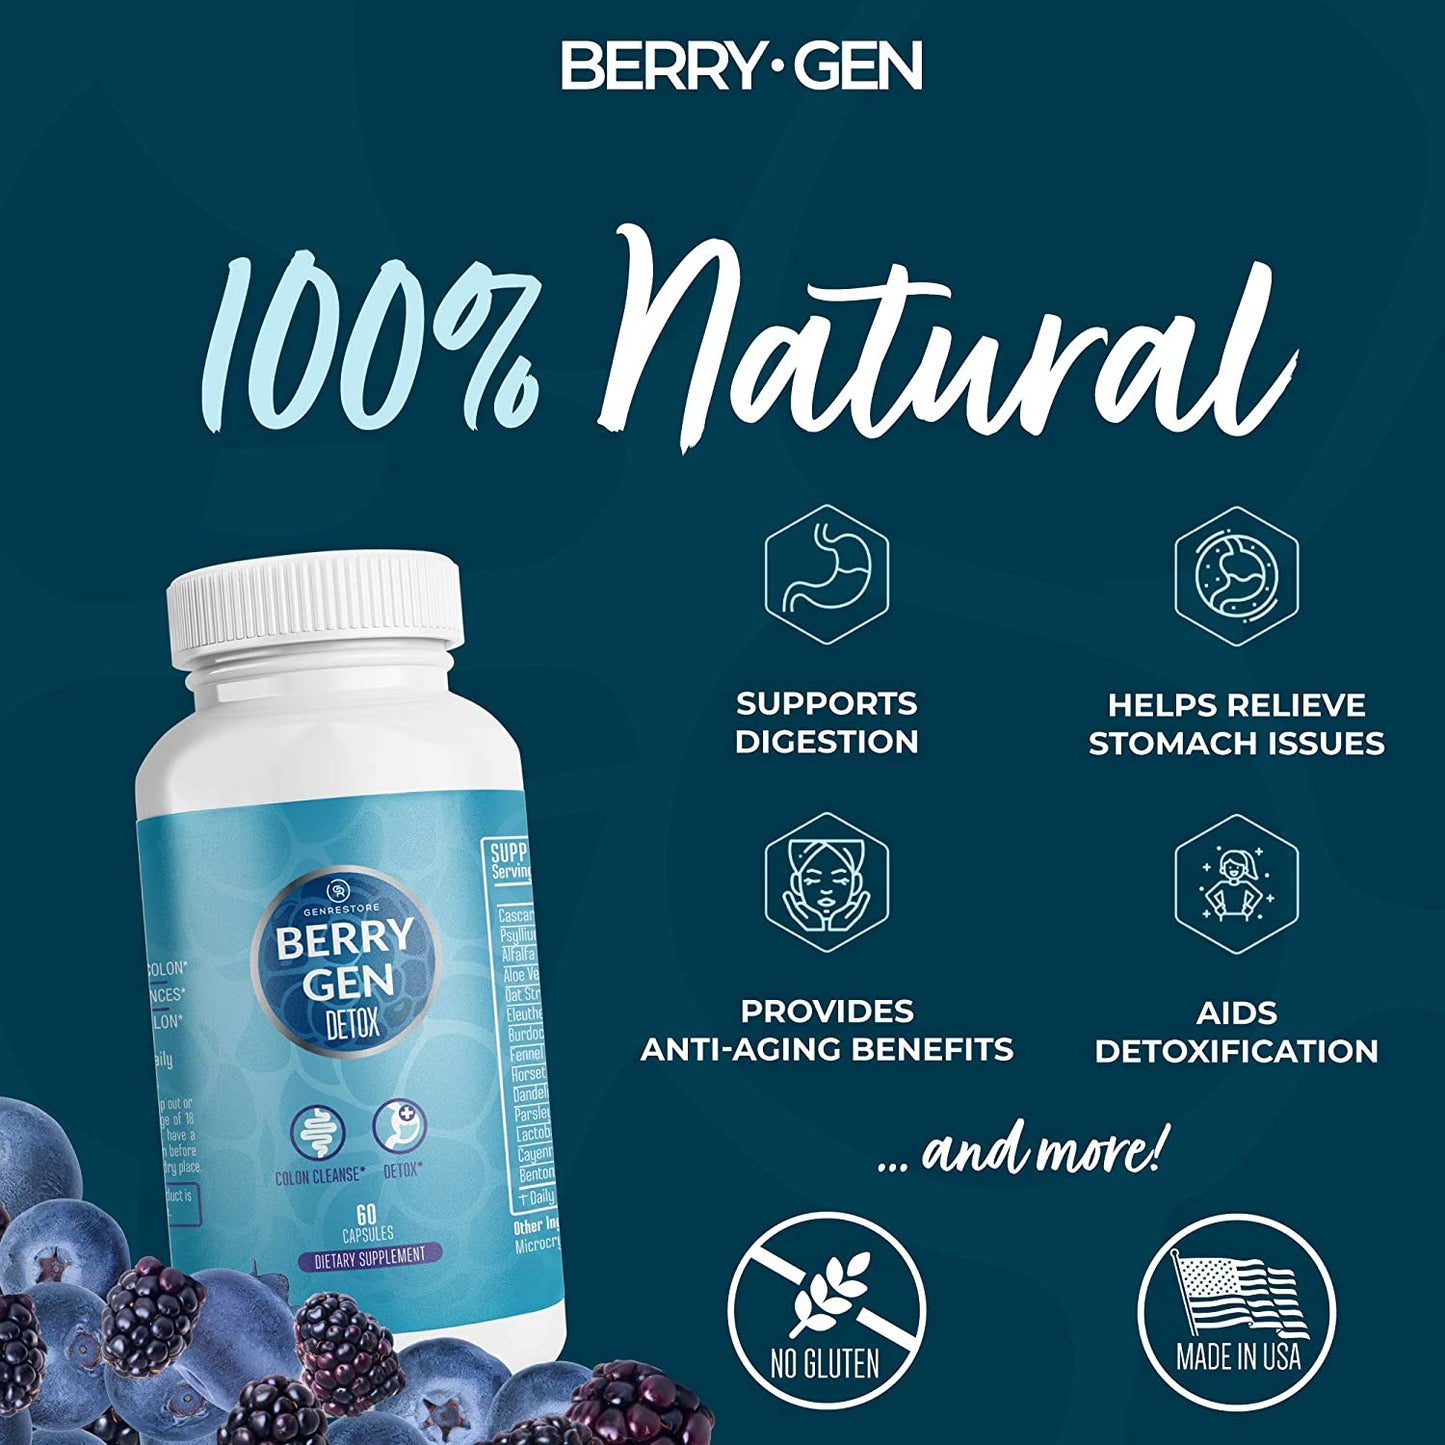  Our natural detox capsules are formulated with premium ingredients to support digestive health and detoxification. Incorporate these gut health supplements into your routine for a rejuvenating cleanse. Try BerryGen's Detox Capsules today!